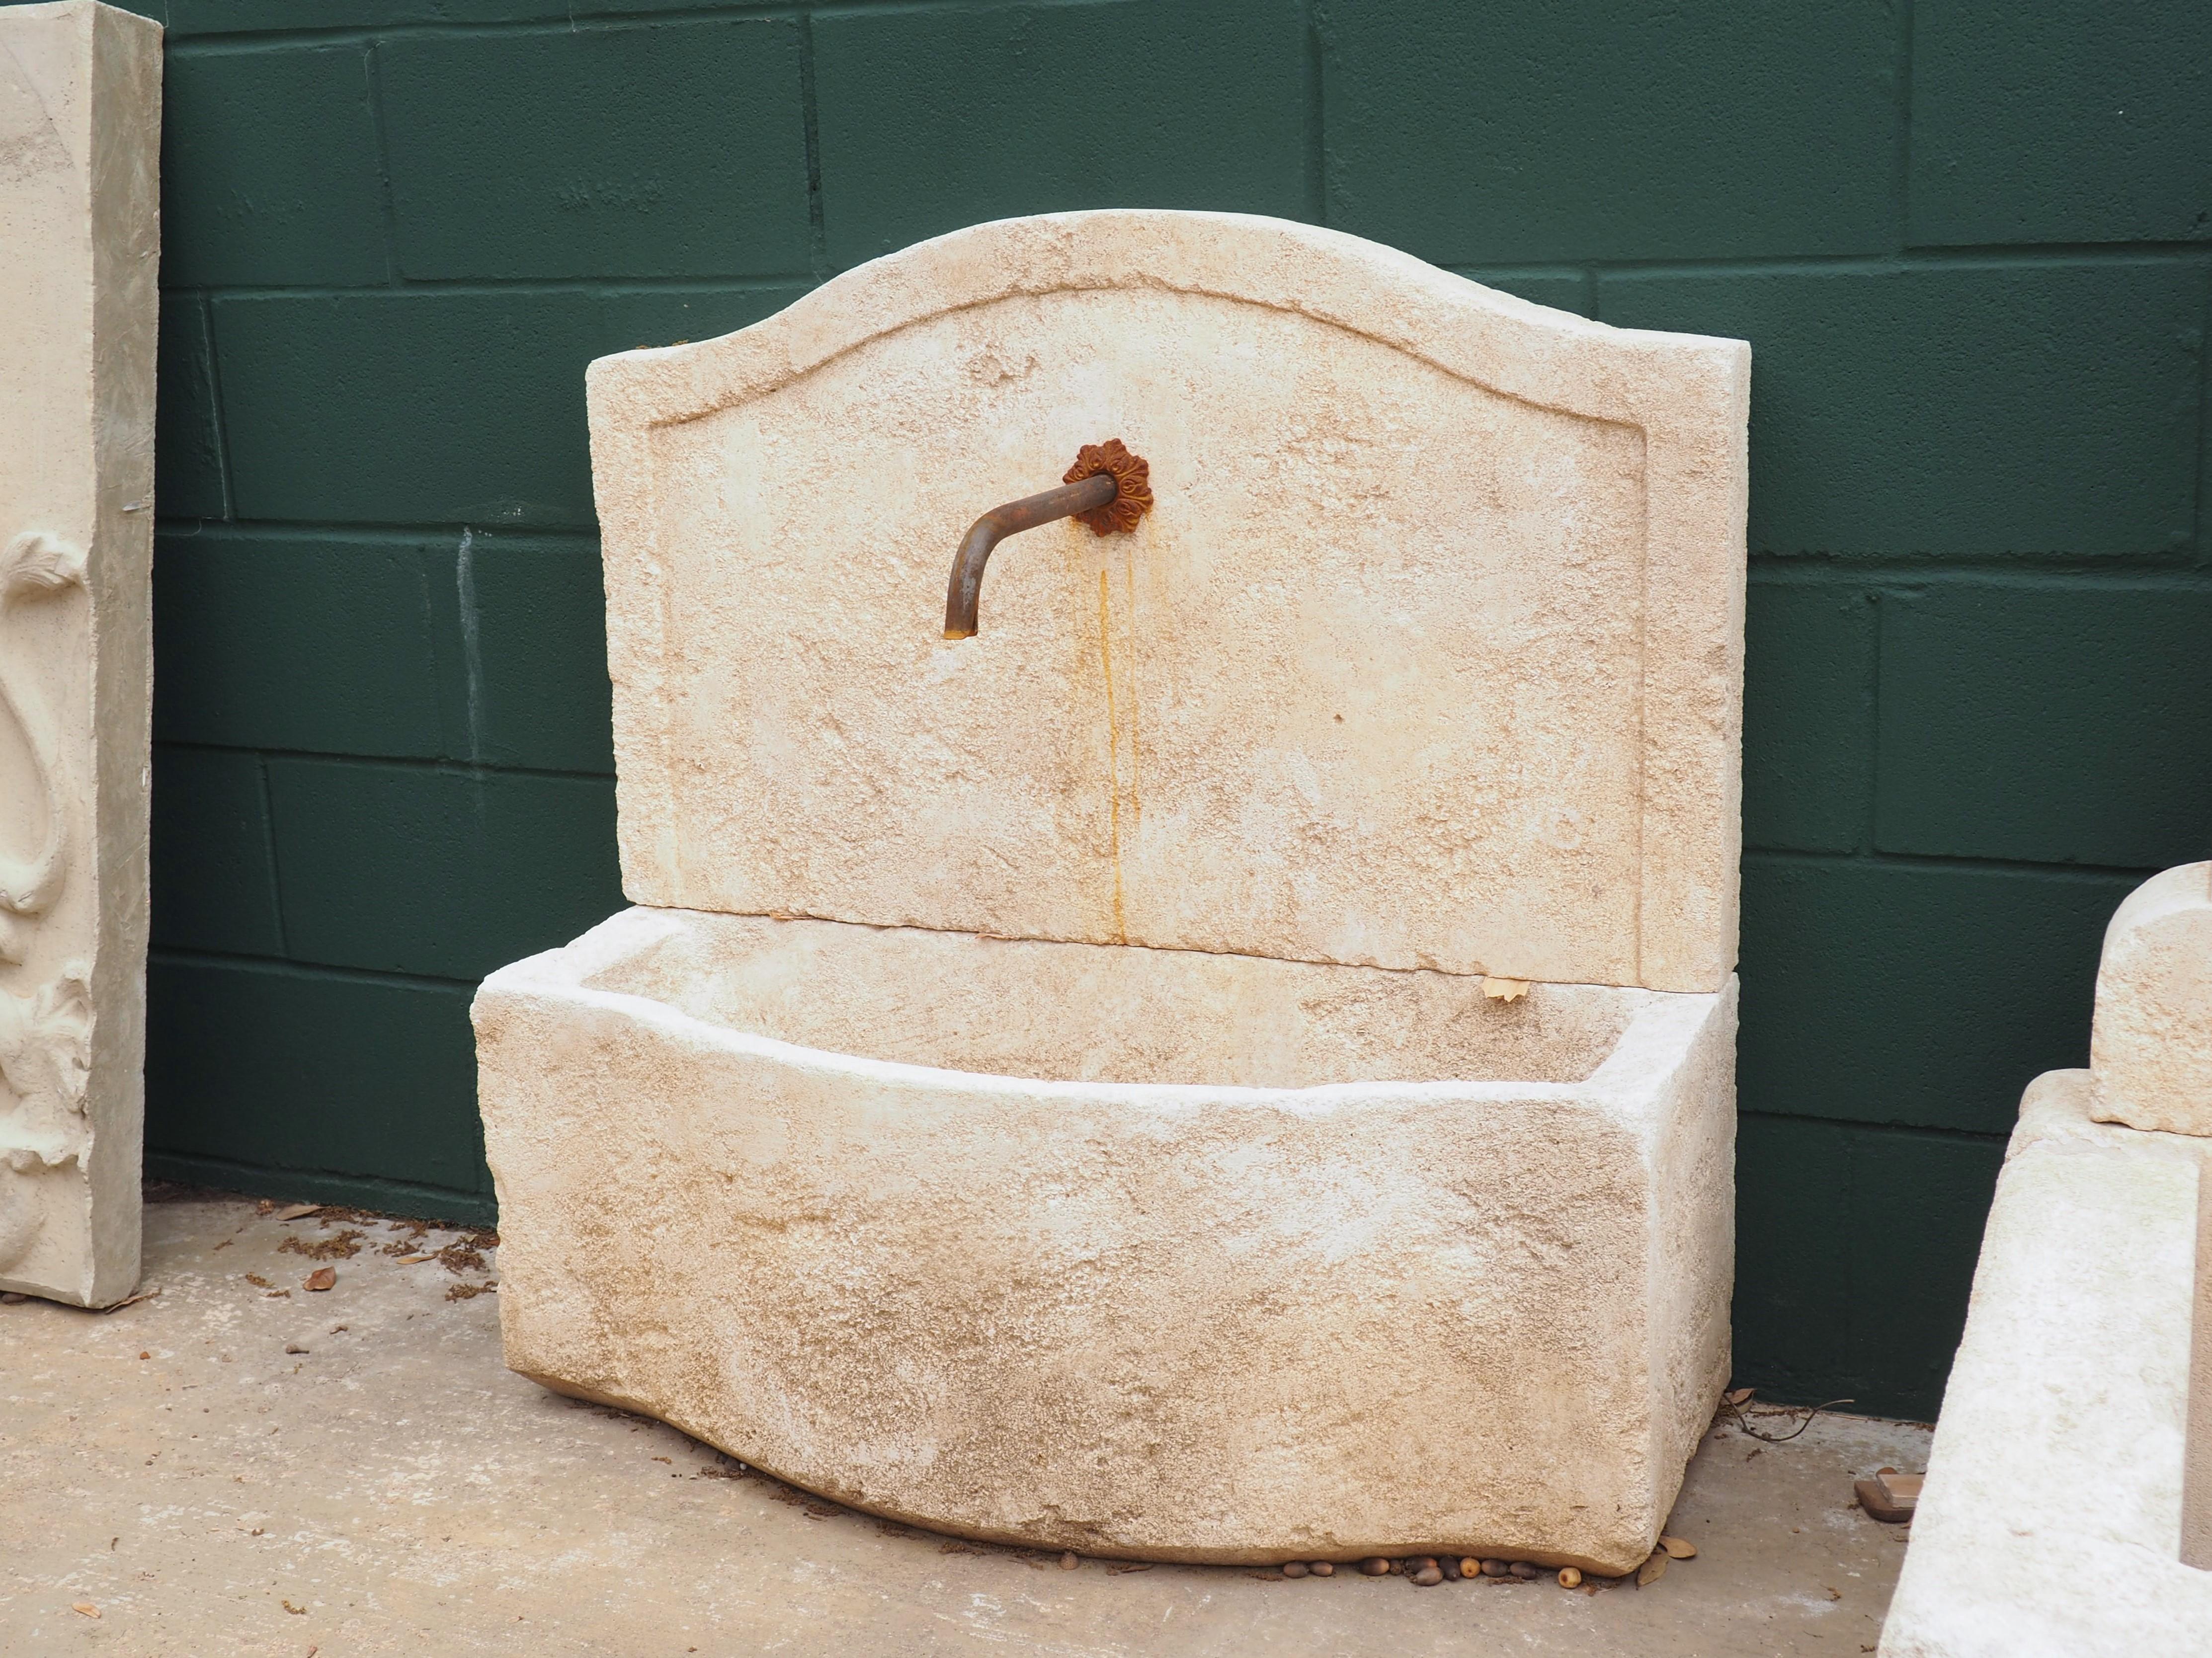 This small, rustic wall fountain was hand carved in the South of France with local limestone. An artistic French finishing technique has been used to give the appearance of age, while exposure to the elements has provided a nice cream and white